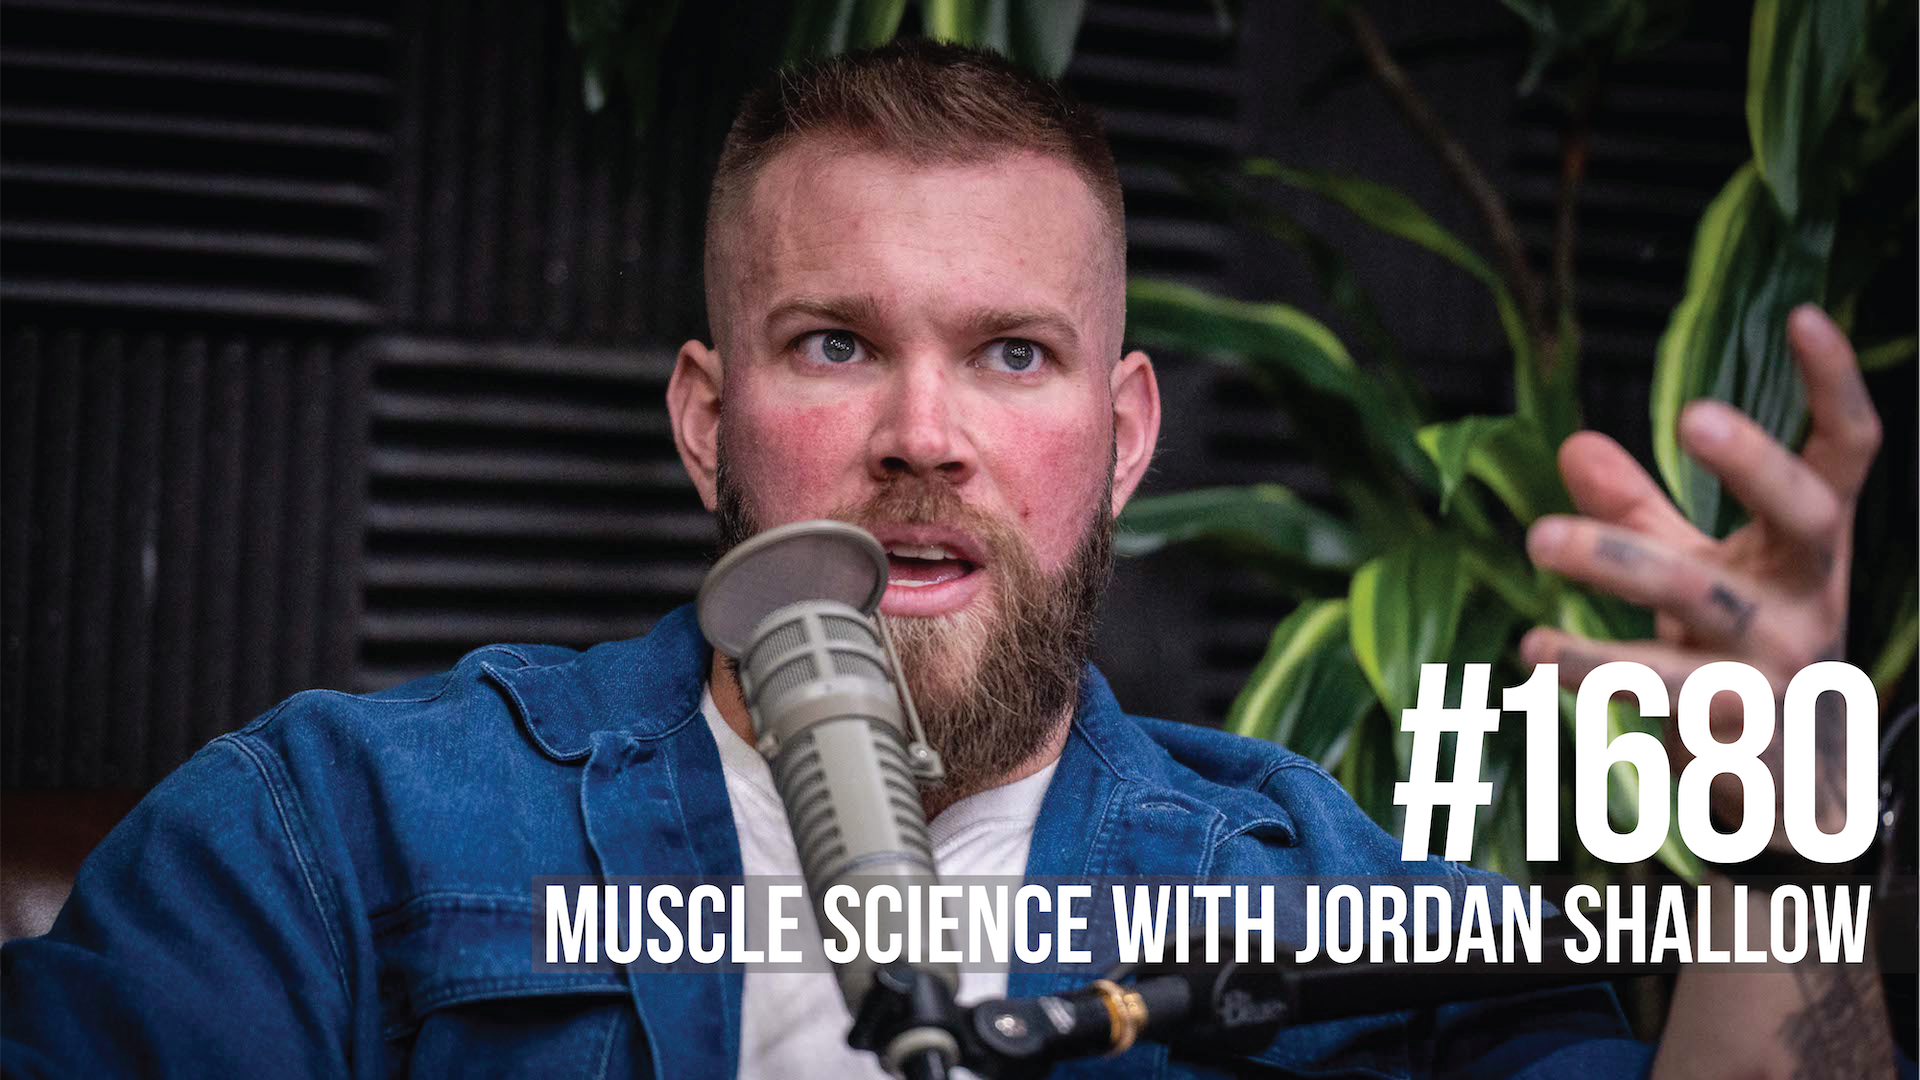 1680: Muscle Science With Jordan Shallow